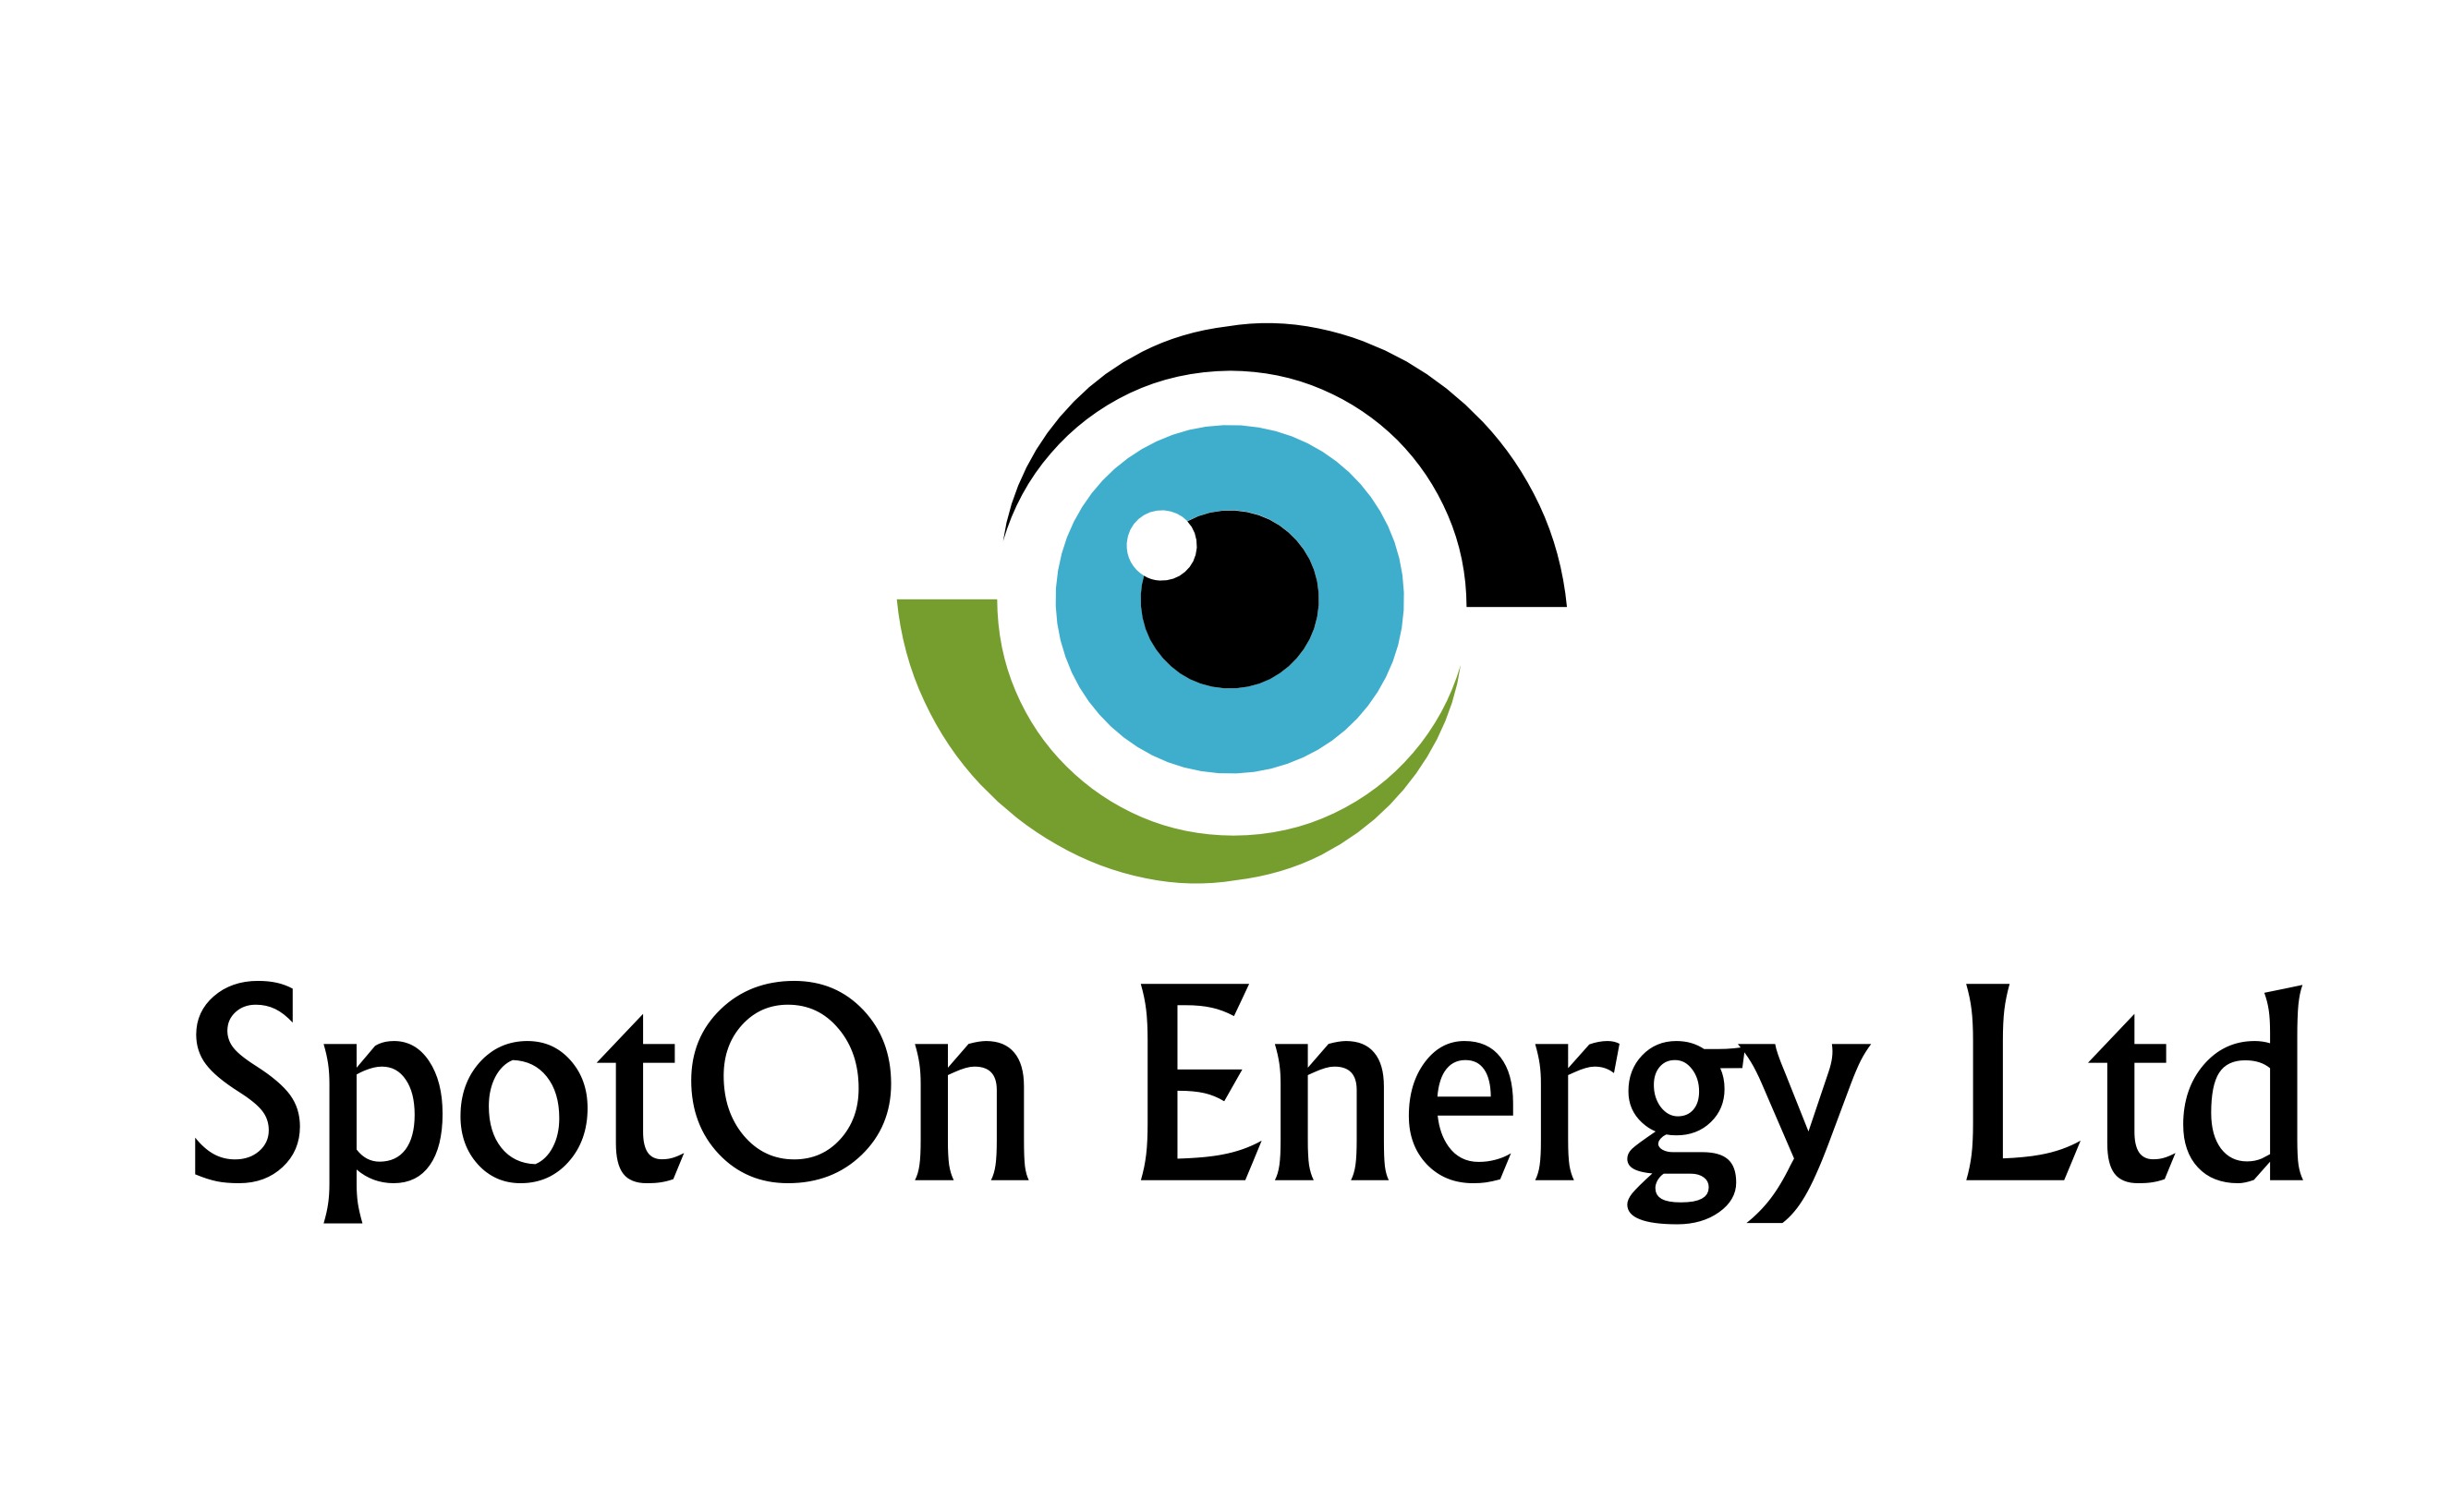 SpotOn Energy Limited